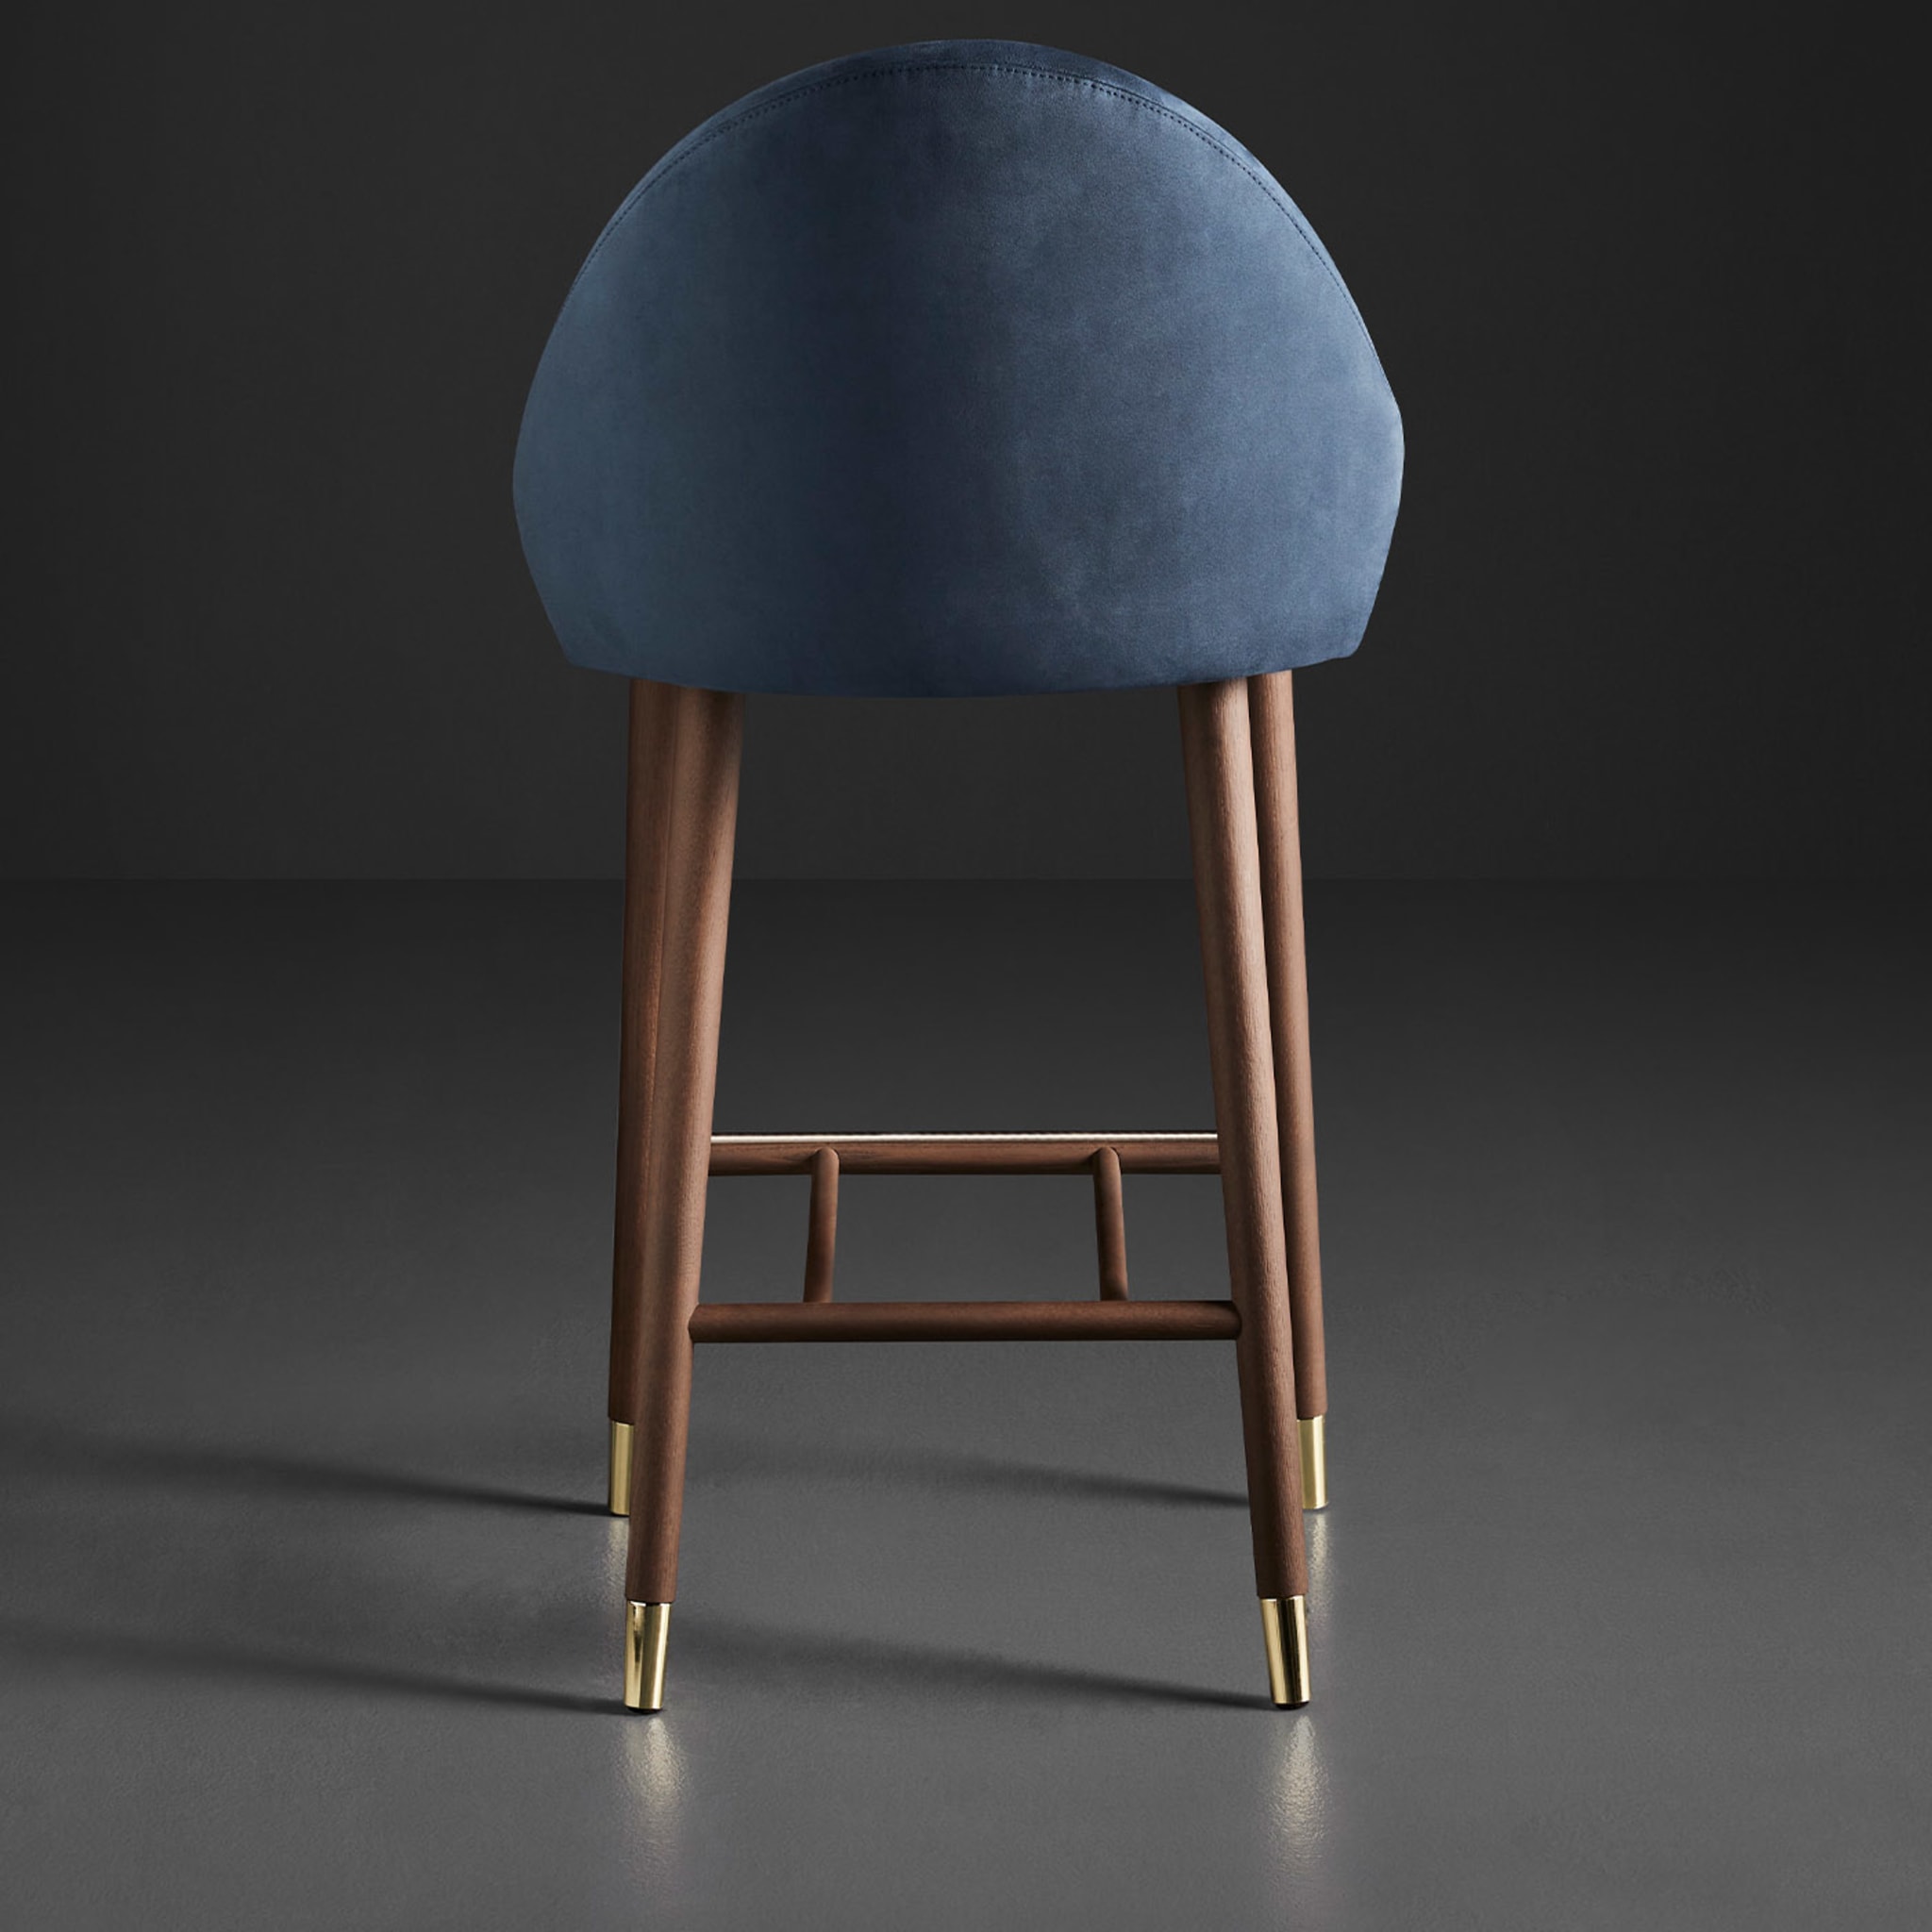 Diana.ss Blue & Brown Stool by W. Colico - Alternative view 2